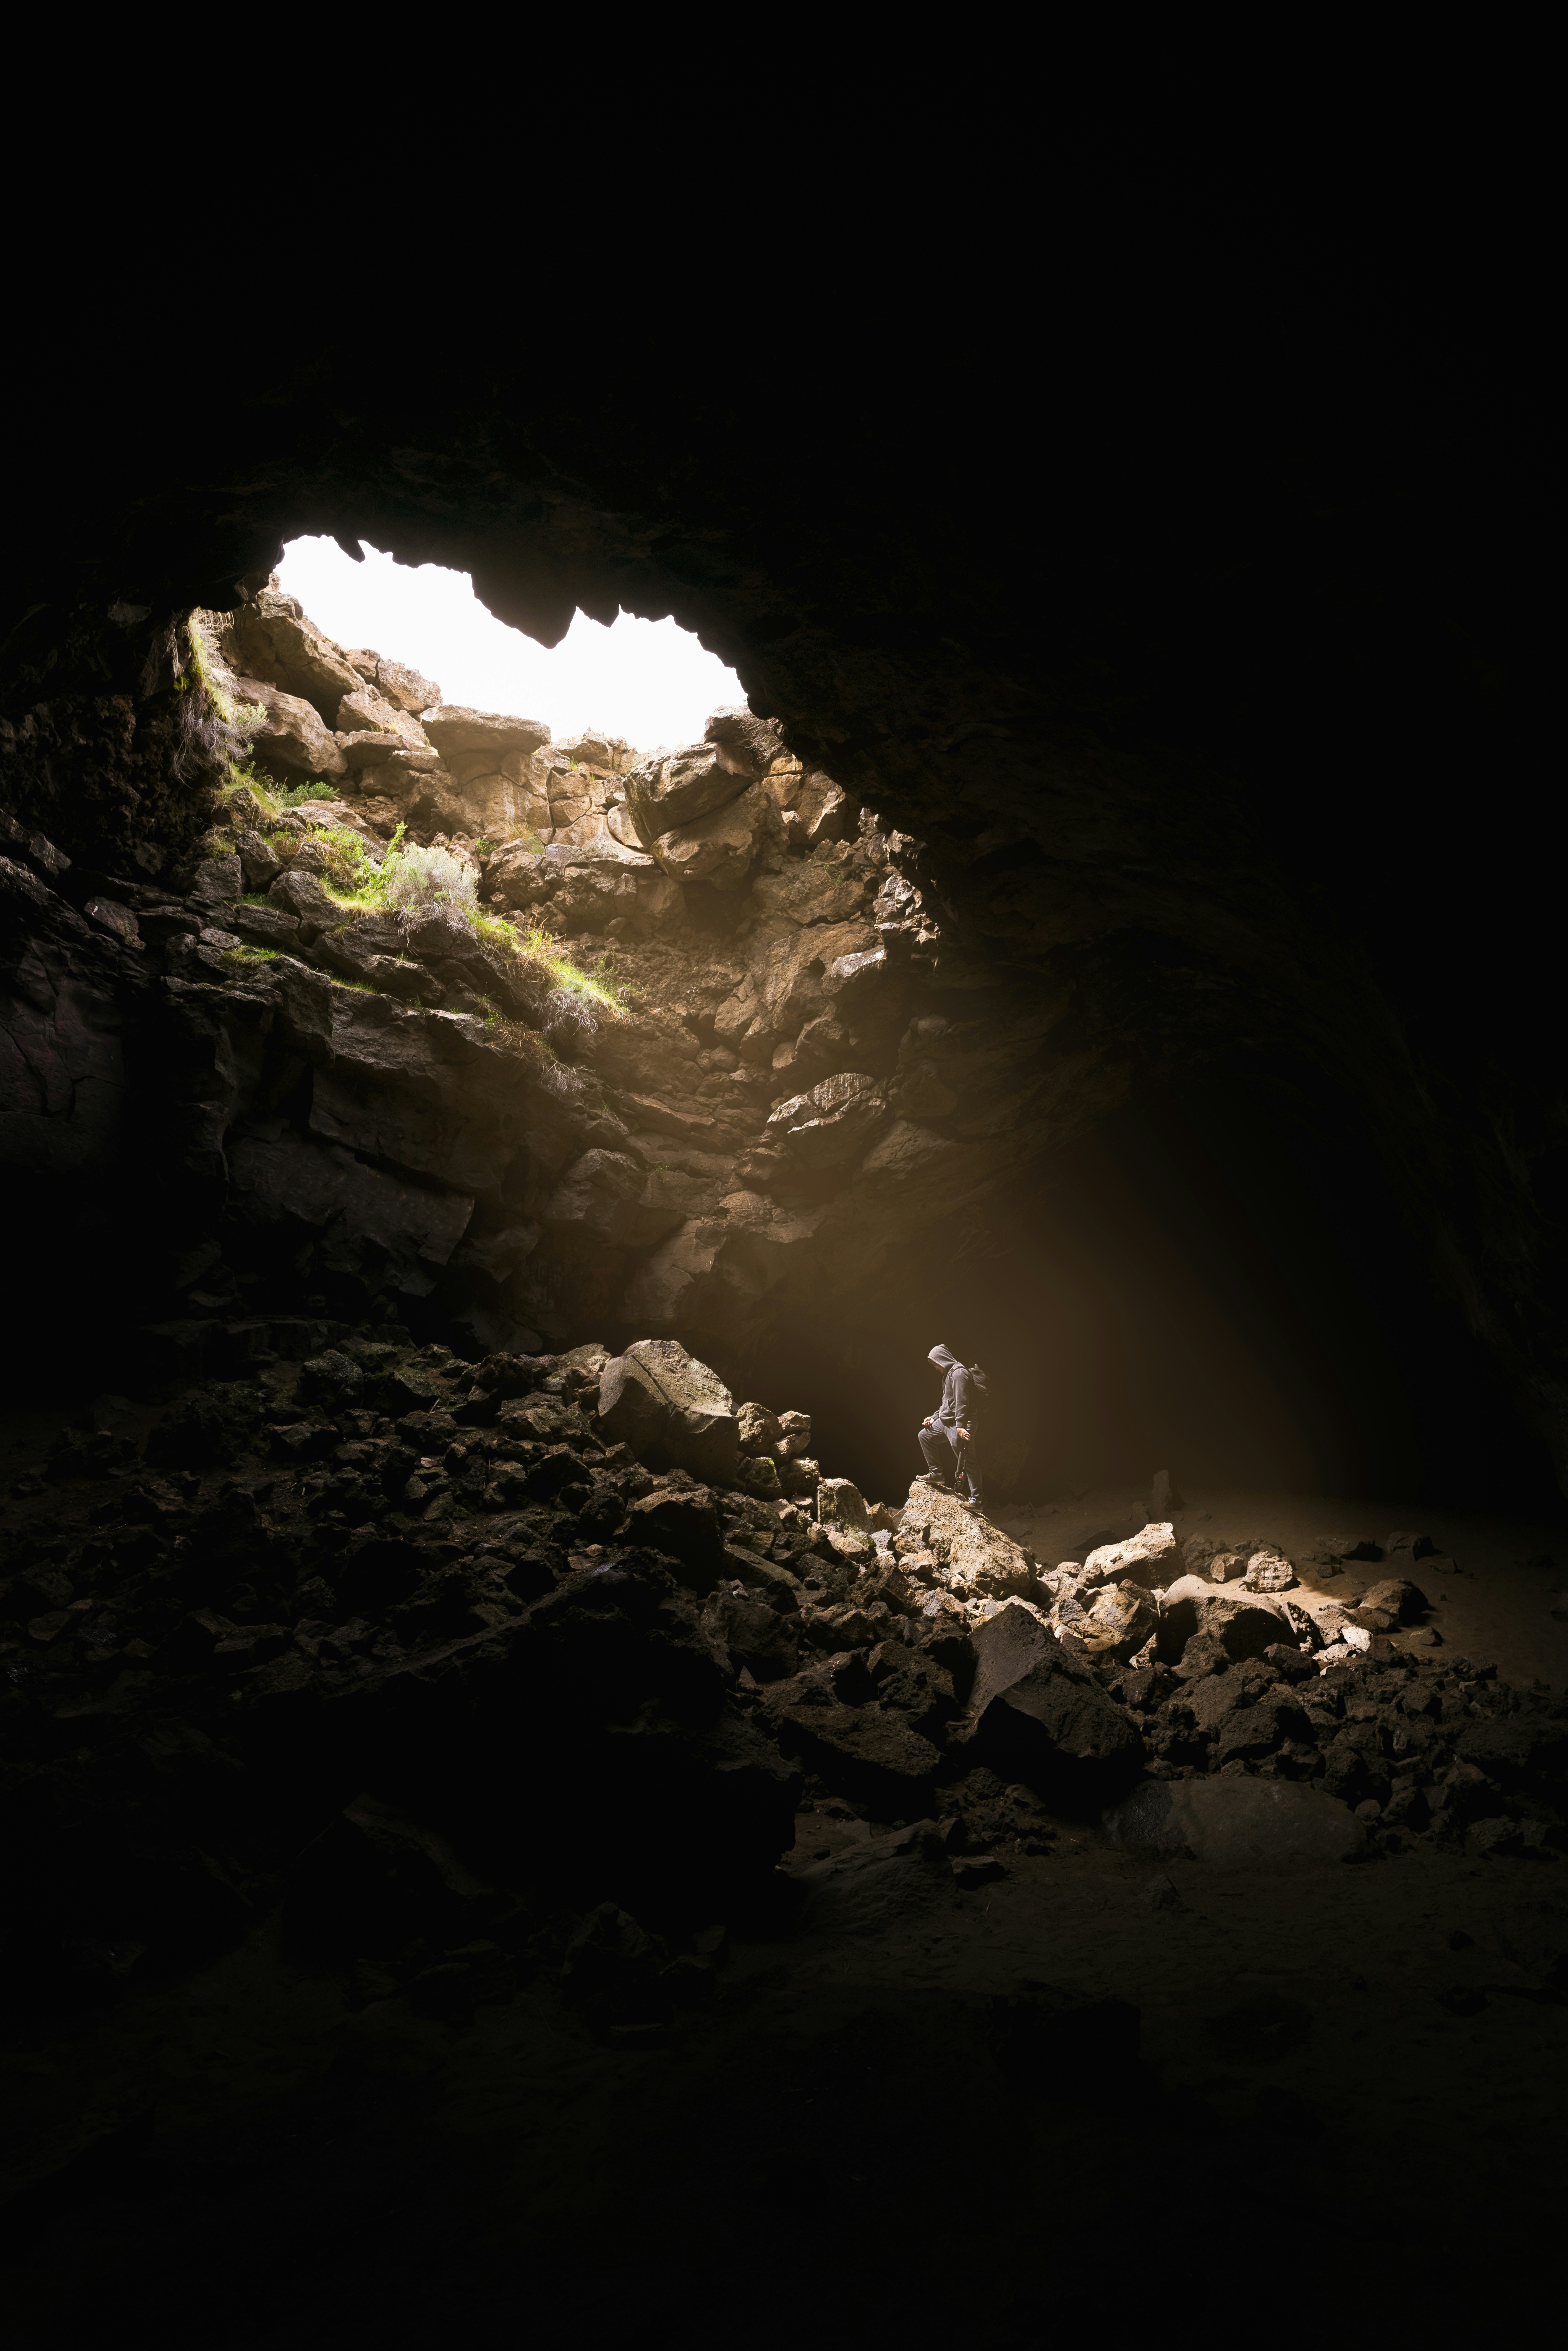 Man standing in dimly lit cave